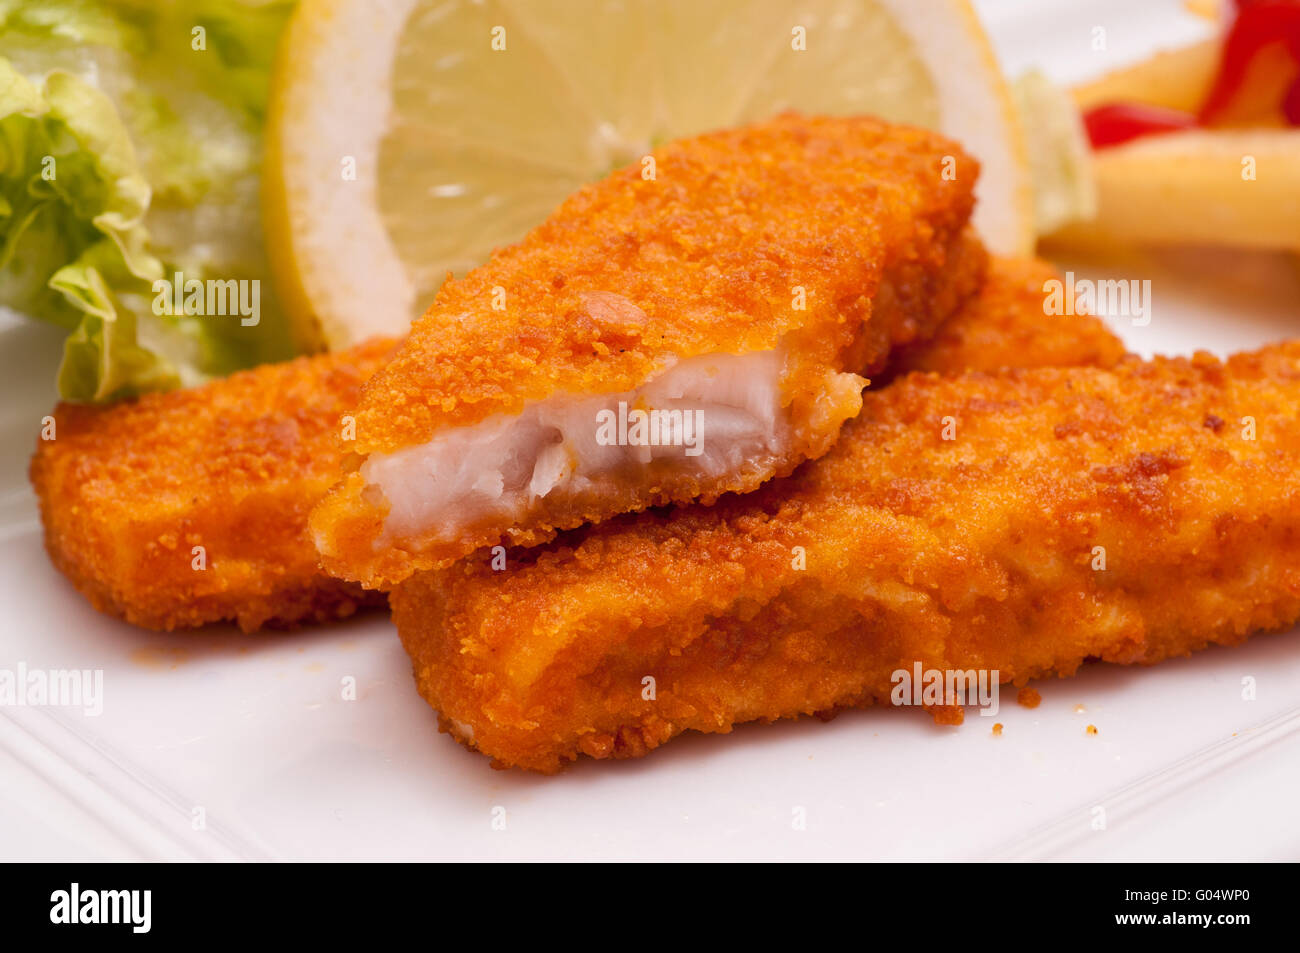 Fast food with breaded fish fingers and a lemon Stock Photo